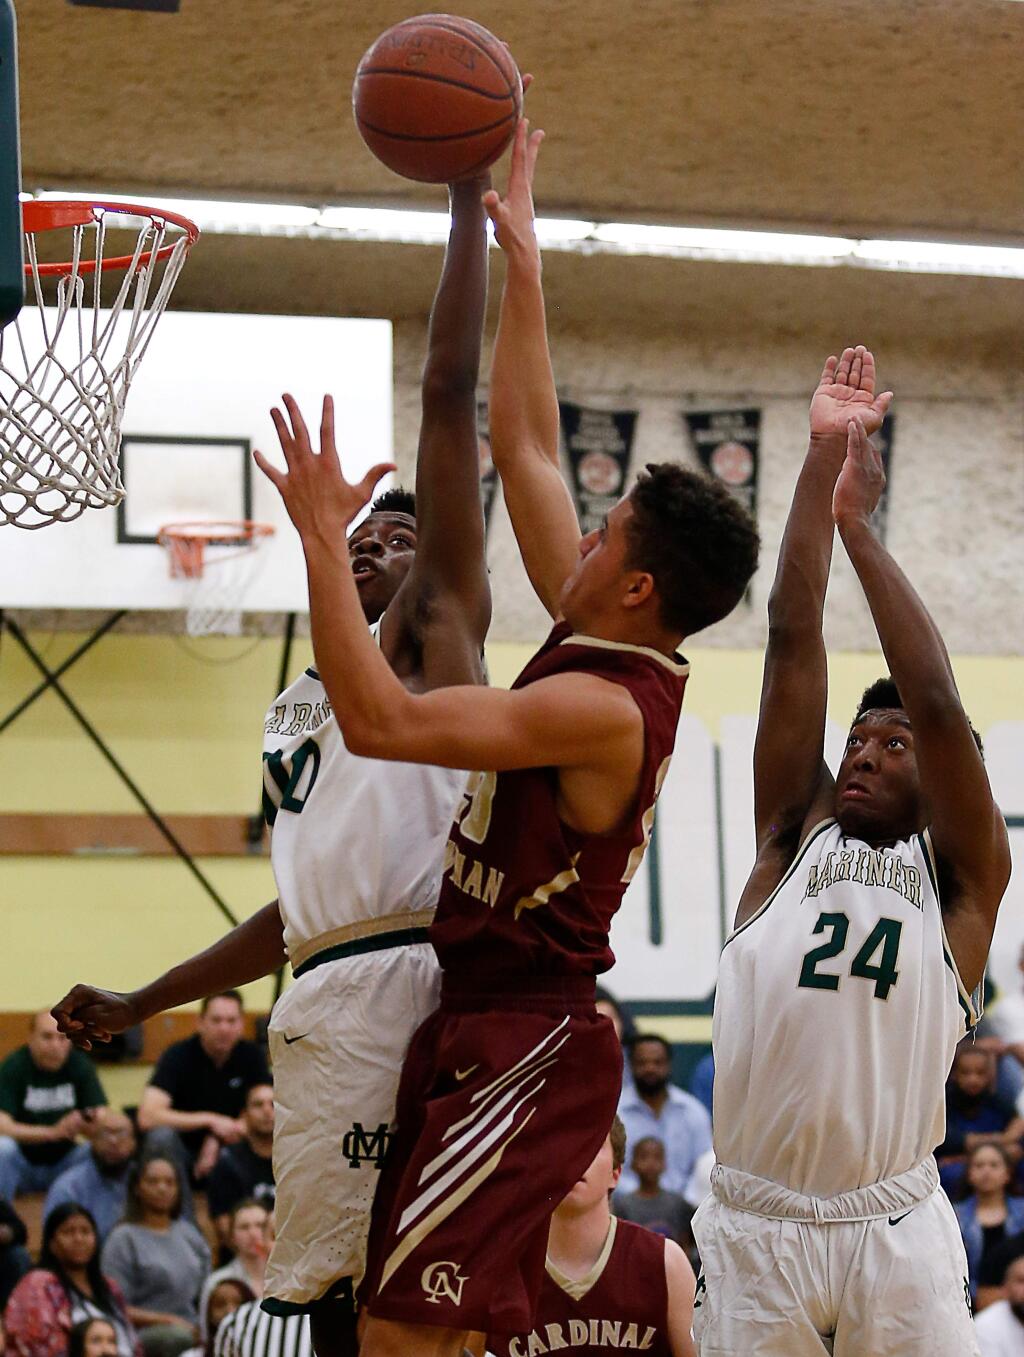 Cardinal Newman's Chauncey LeBerthon (20), center, gets blocked by Moreau Catholic's Leonard Turner (00), left, as he attempts a layup during the first half of the CIF Division II State boys basketball semifinal game between Cardinal Newman and Moreau Catholic high schools in Hayward, California on Tuesday, March 14, 2017. (Alvin Jornada / The Press Democrat)